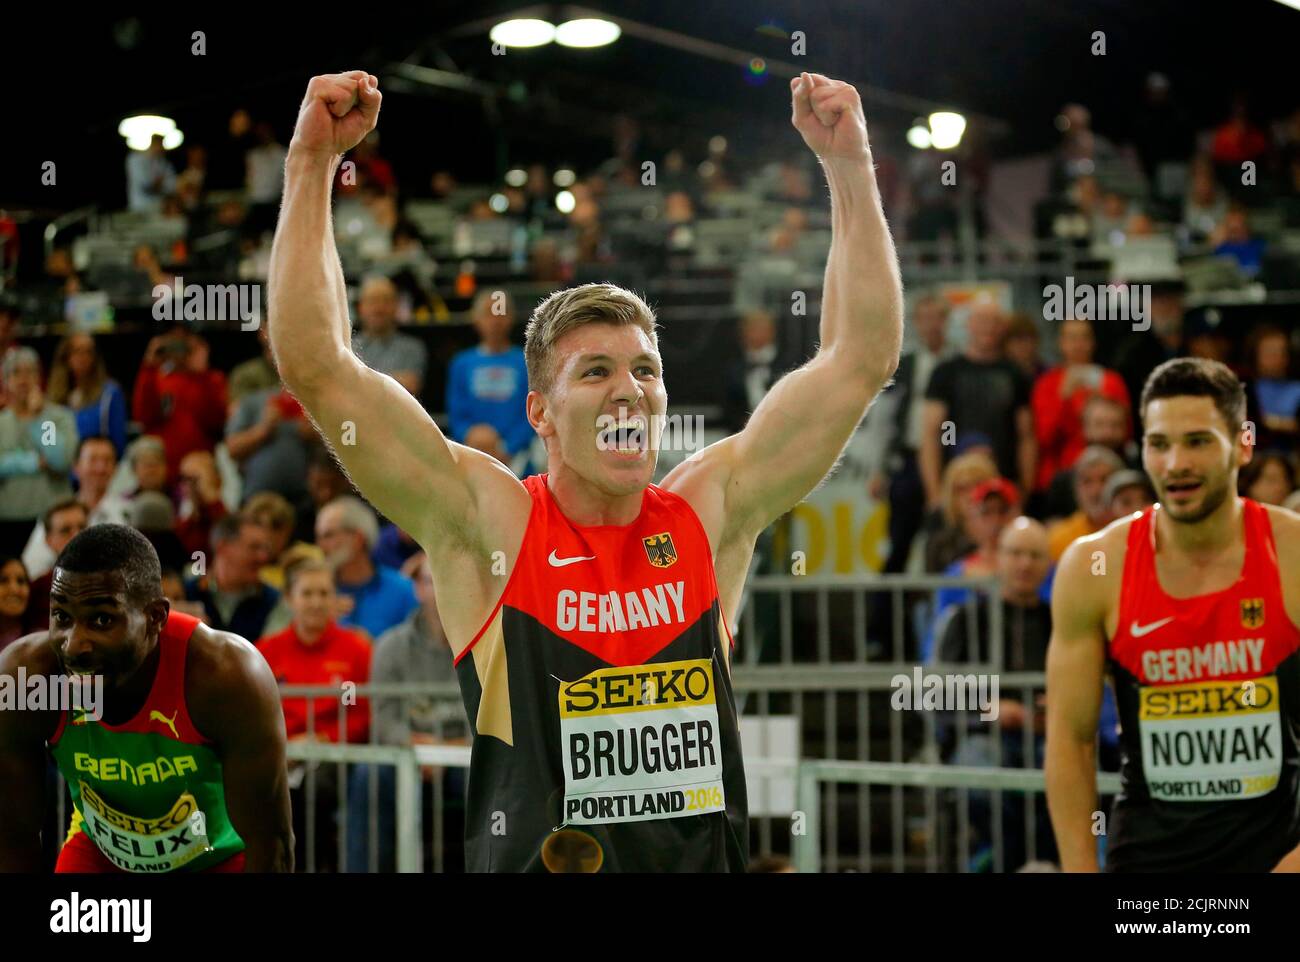 Mathias Brugger of Germany celebrates his bronze medal in the men's heptathlon during the IAAF World Indoor Athletics Championships in Portland, Oregon March 19, 2016. REUTERS/Mike Blake Stock Photo